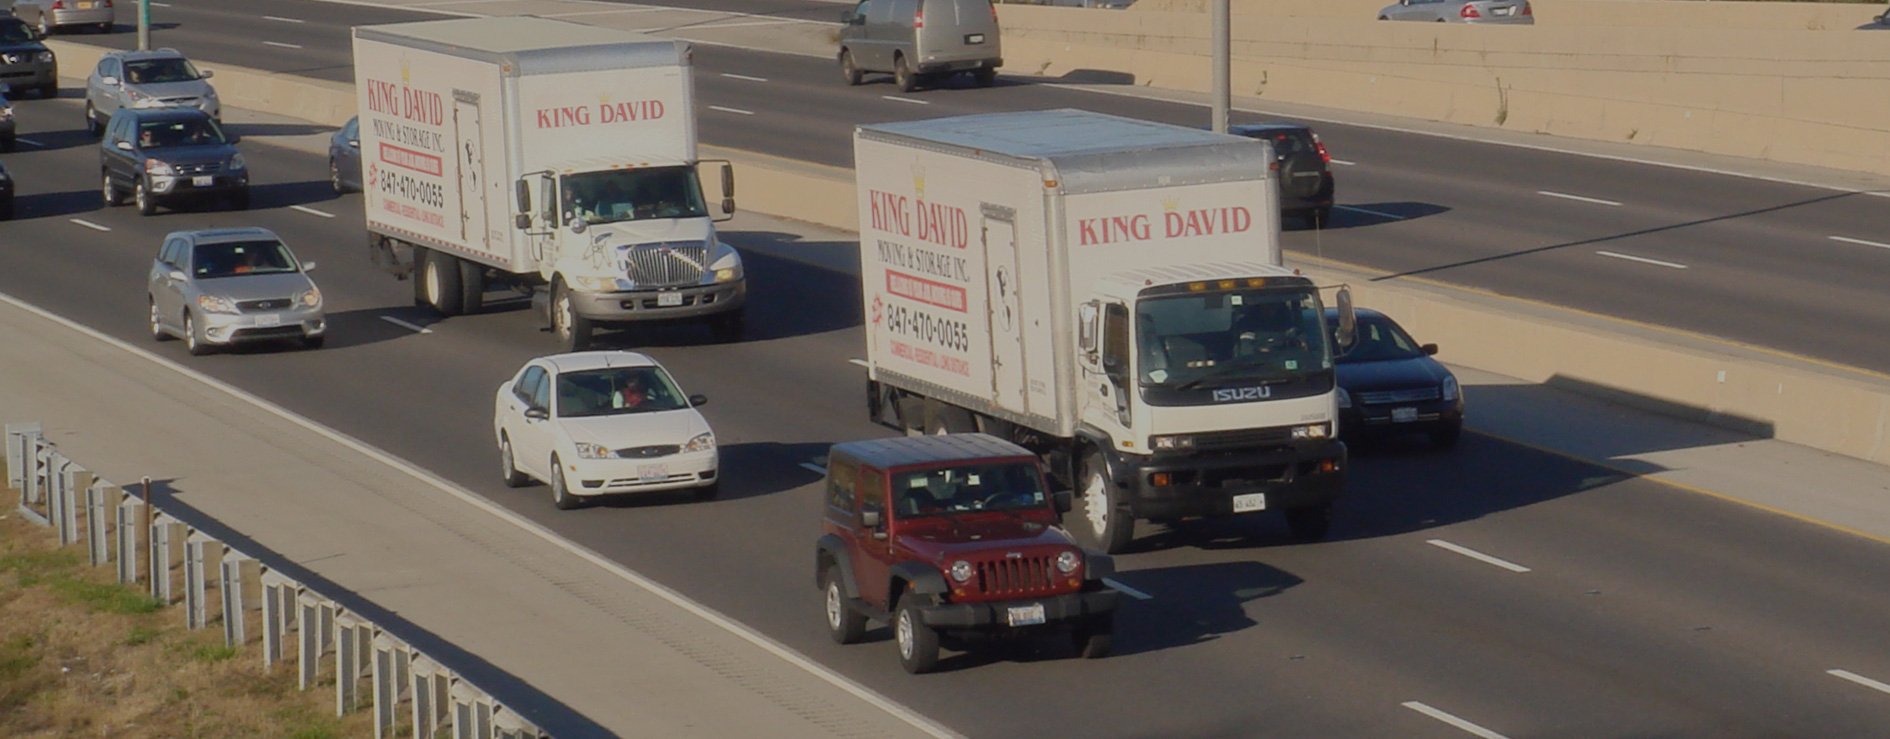 Chicago Moving Company | Local Movers | King David Movers